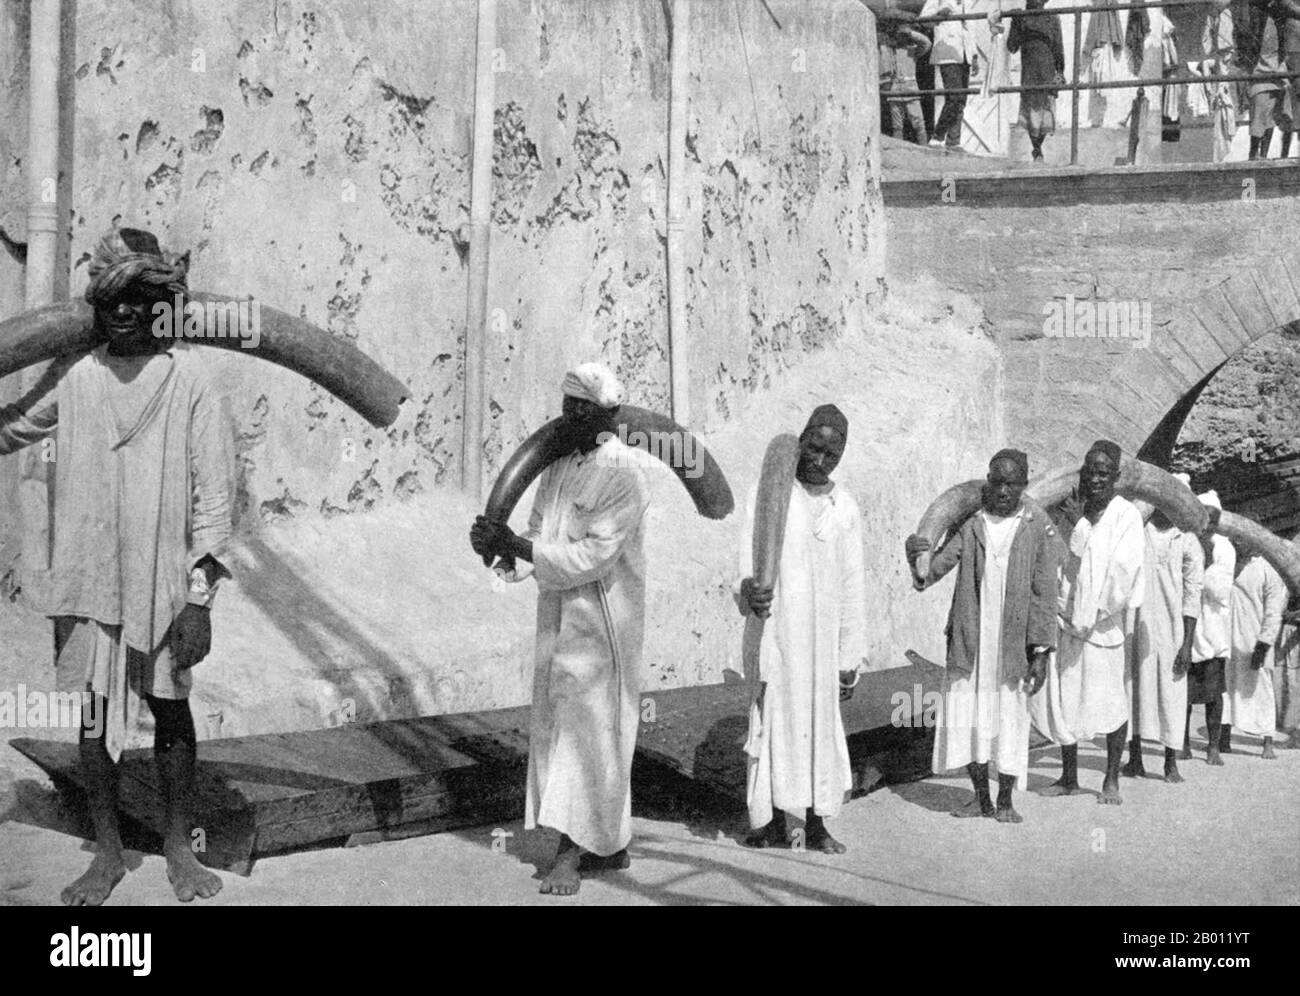 Kenya: Ivory porters carrying elephant tusks at Fort Jesus, Mombasa, c. 1922.  Elephant ivory has been exported from Africa and Asia for centuries with records going back to the 14th century BC. Throughout the colonisation of Africa ivory was removed, often using slaves to carry the tusks, to be used for piano keys, billiard balls and other expressions of exotic wealth.  Ivory hunters were responsible for wiping out elephants in North Africa perhaps about 1,000 years ago, in much of South Africa in the 19th century and most of West Africa by the end of the 20th century. Stock Photo